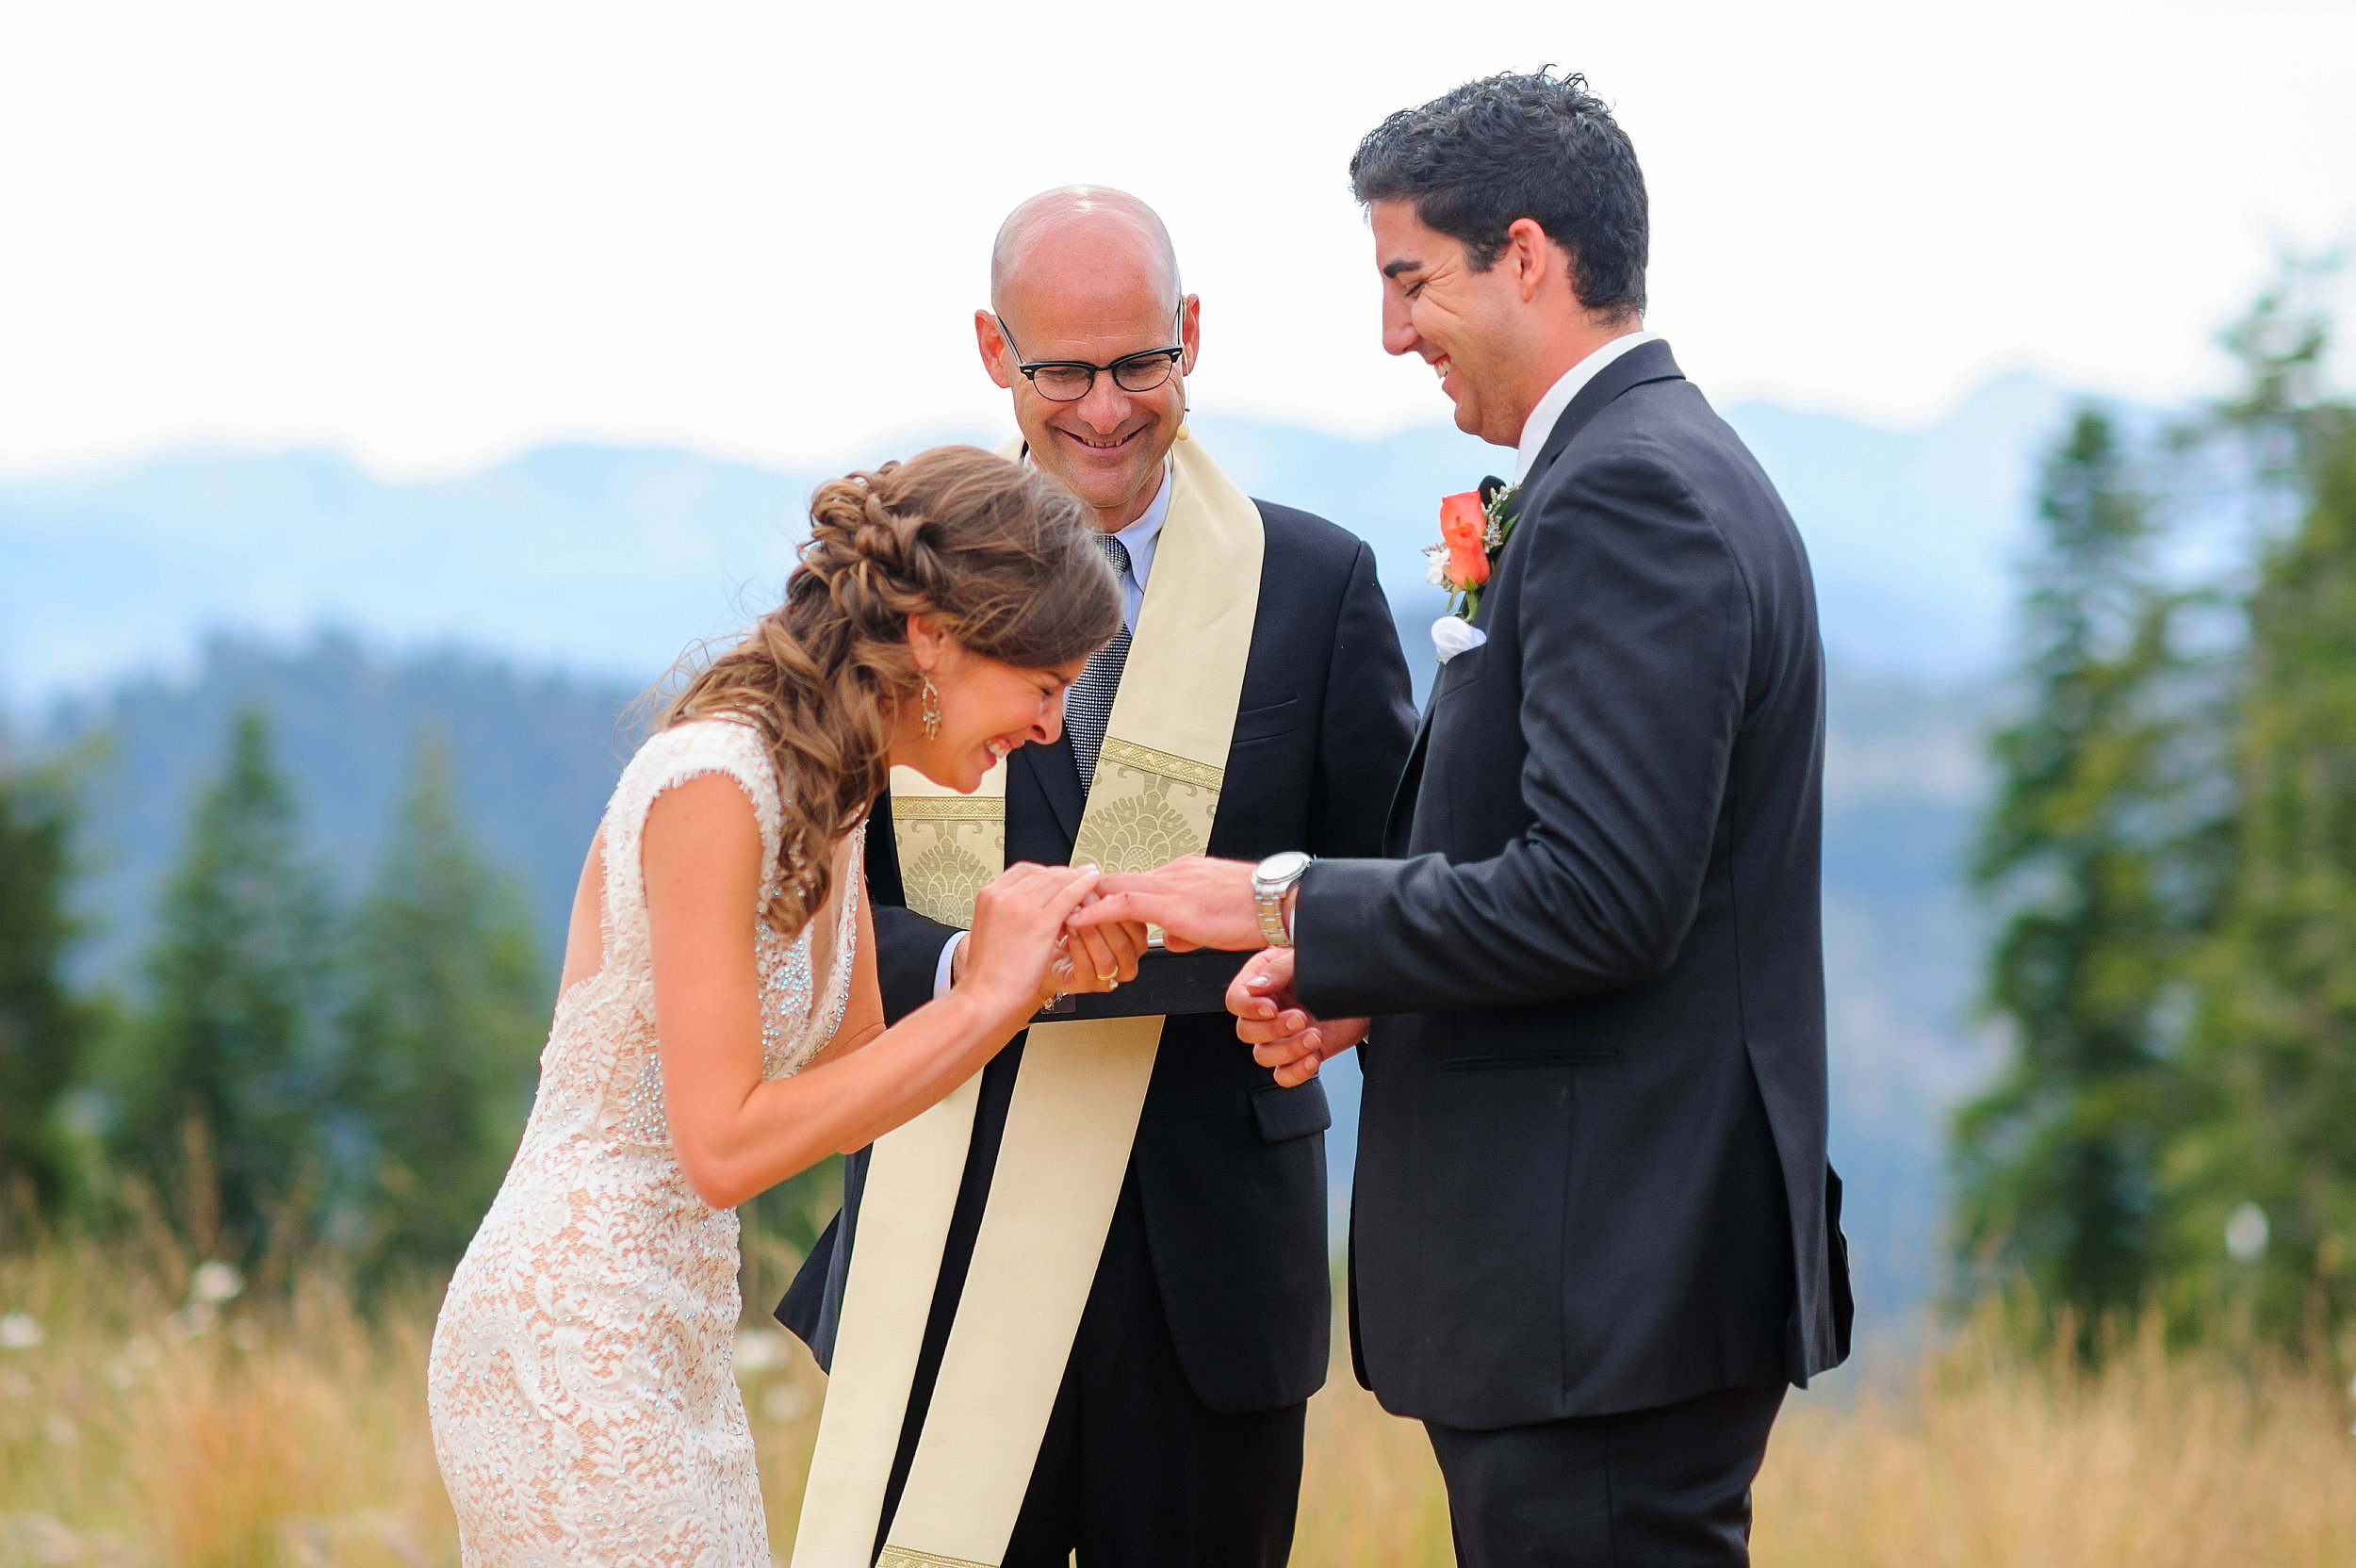  Ring exchange during ceremony at Zephyr Lodge at Northstar California Resort in Truckee California. 